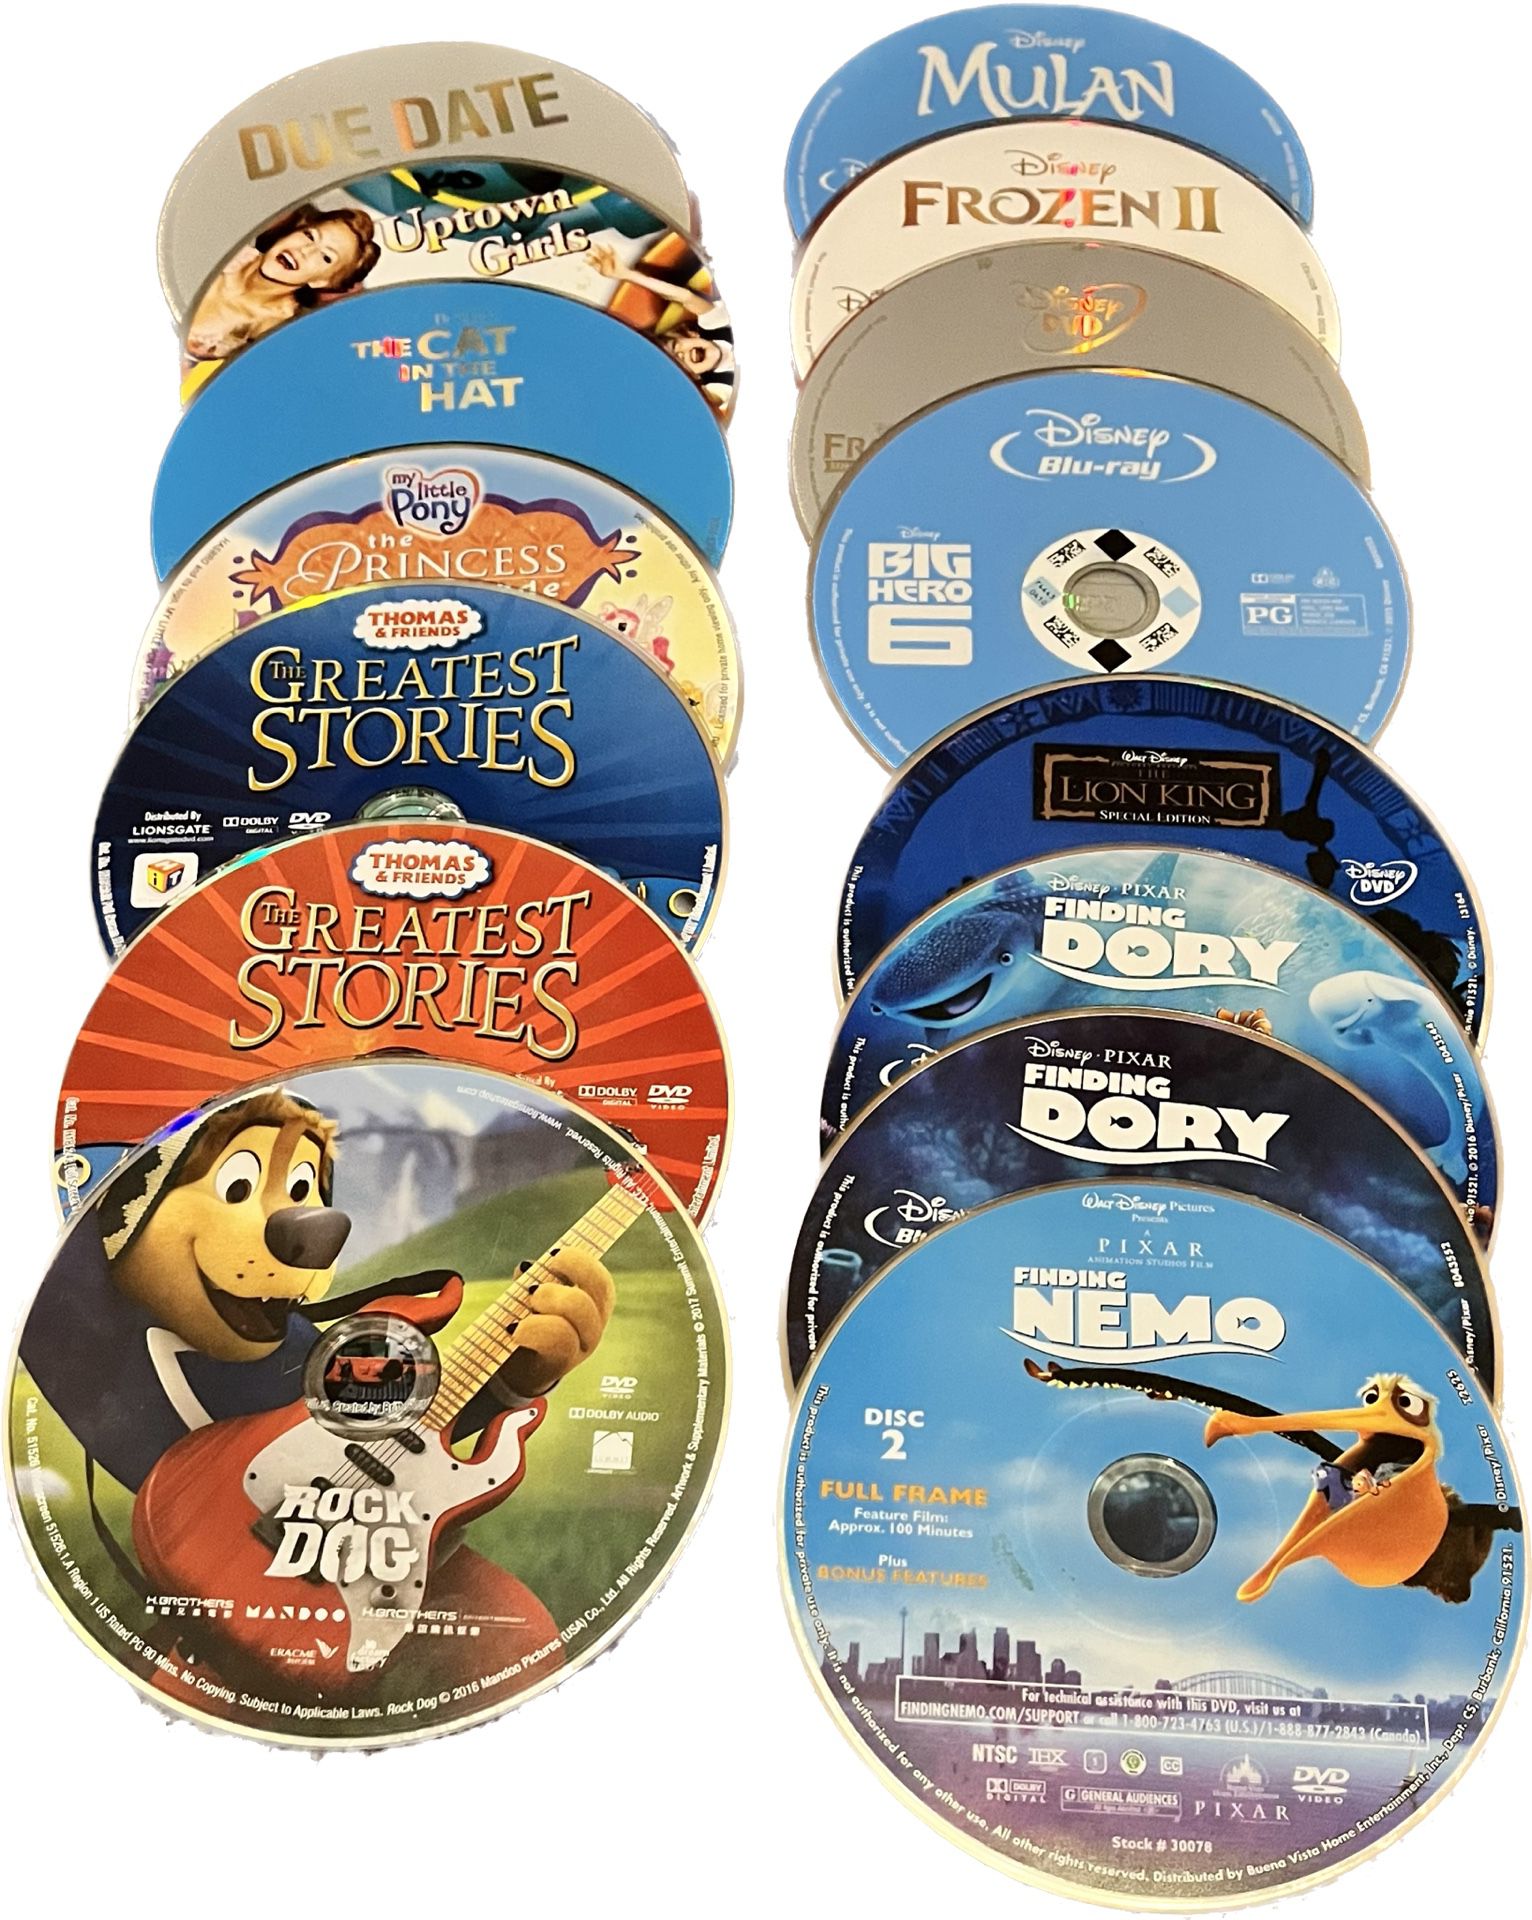 26 Assorted Family Movies - DVD & Blu-ray Mix